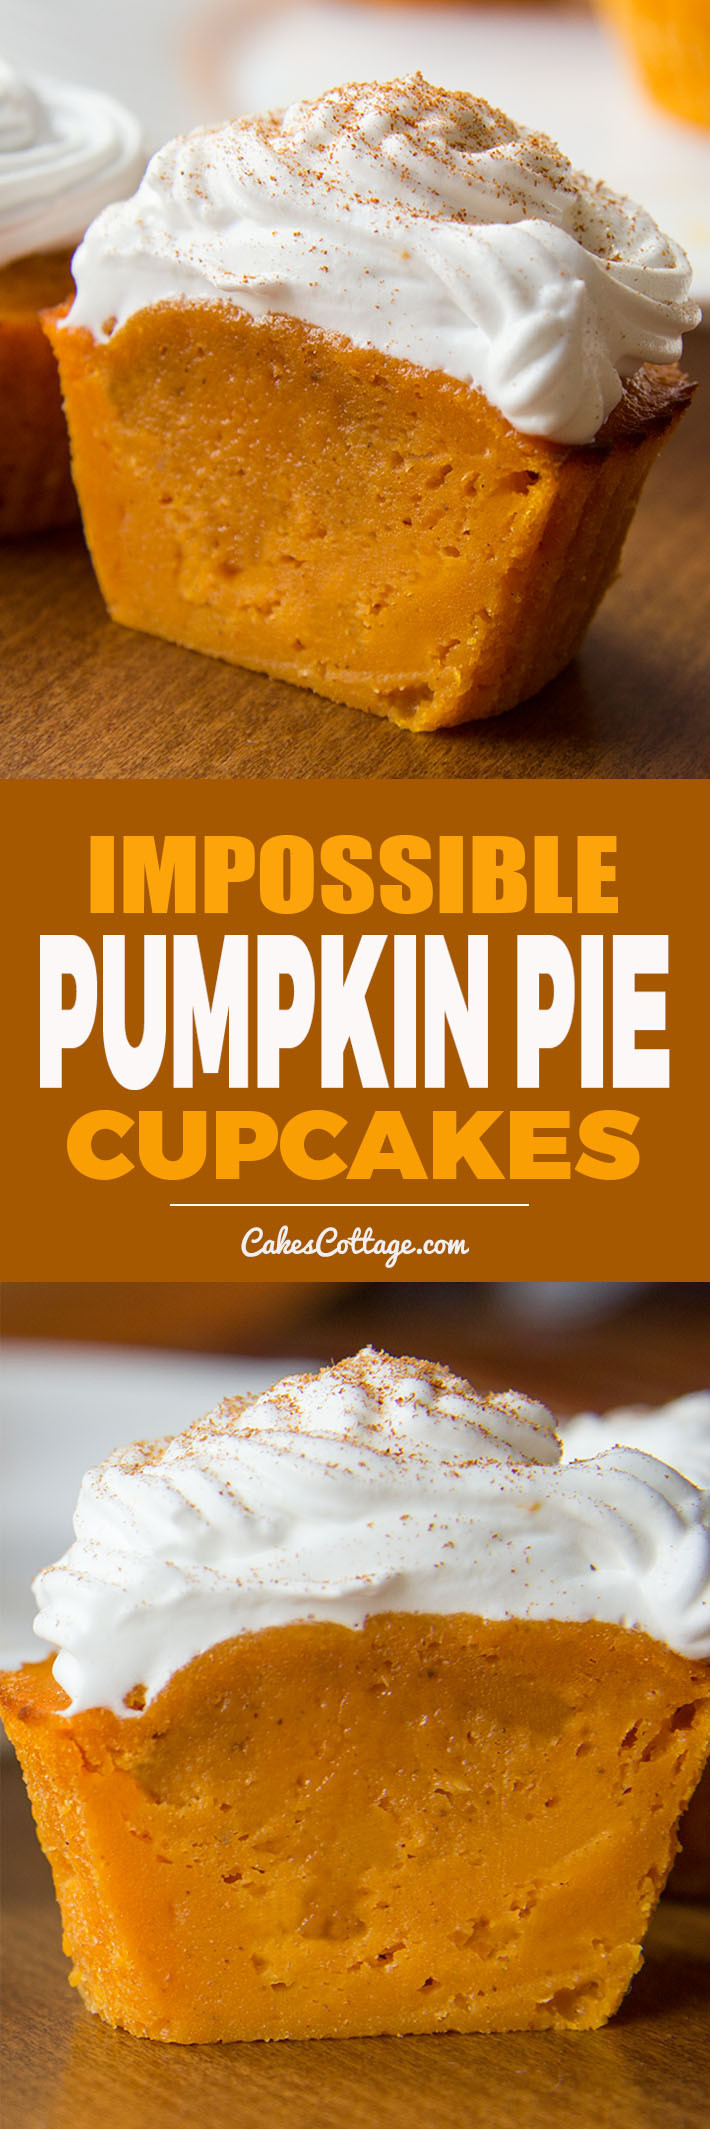 Impossible Pumpkin Pie
 Impossible Pumpkin Pie Cupcakes Page 2 of 2 Cakescottage